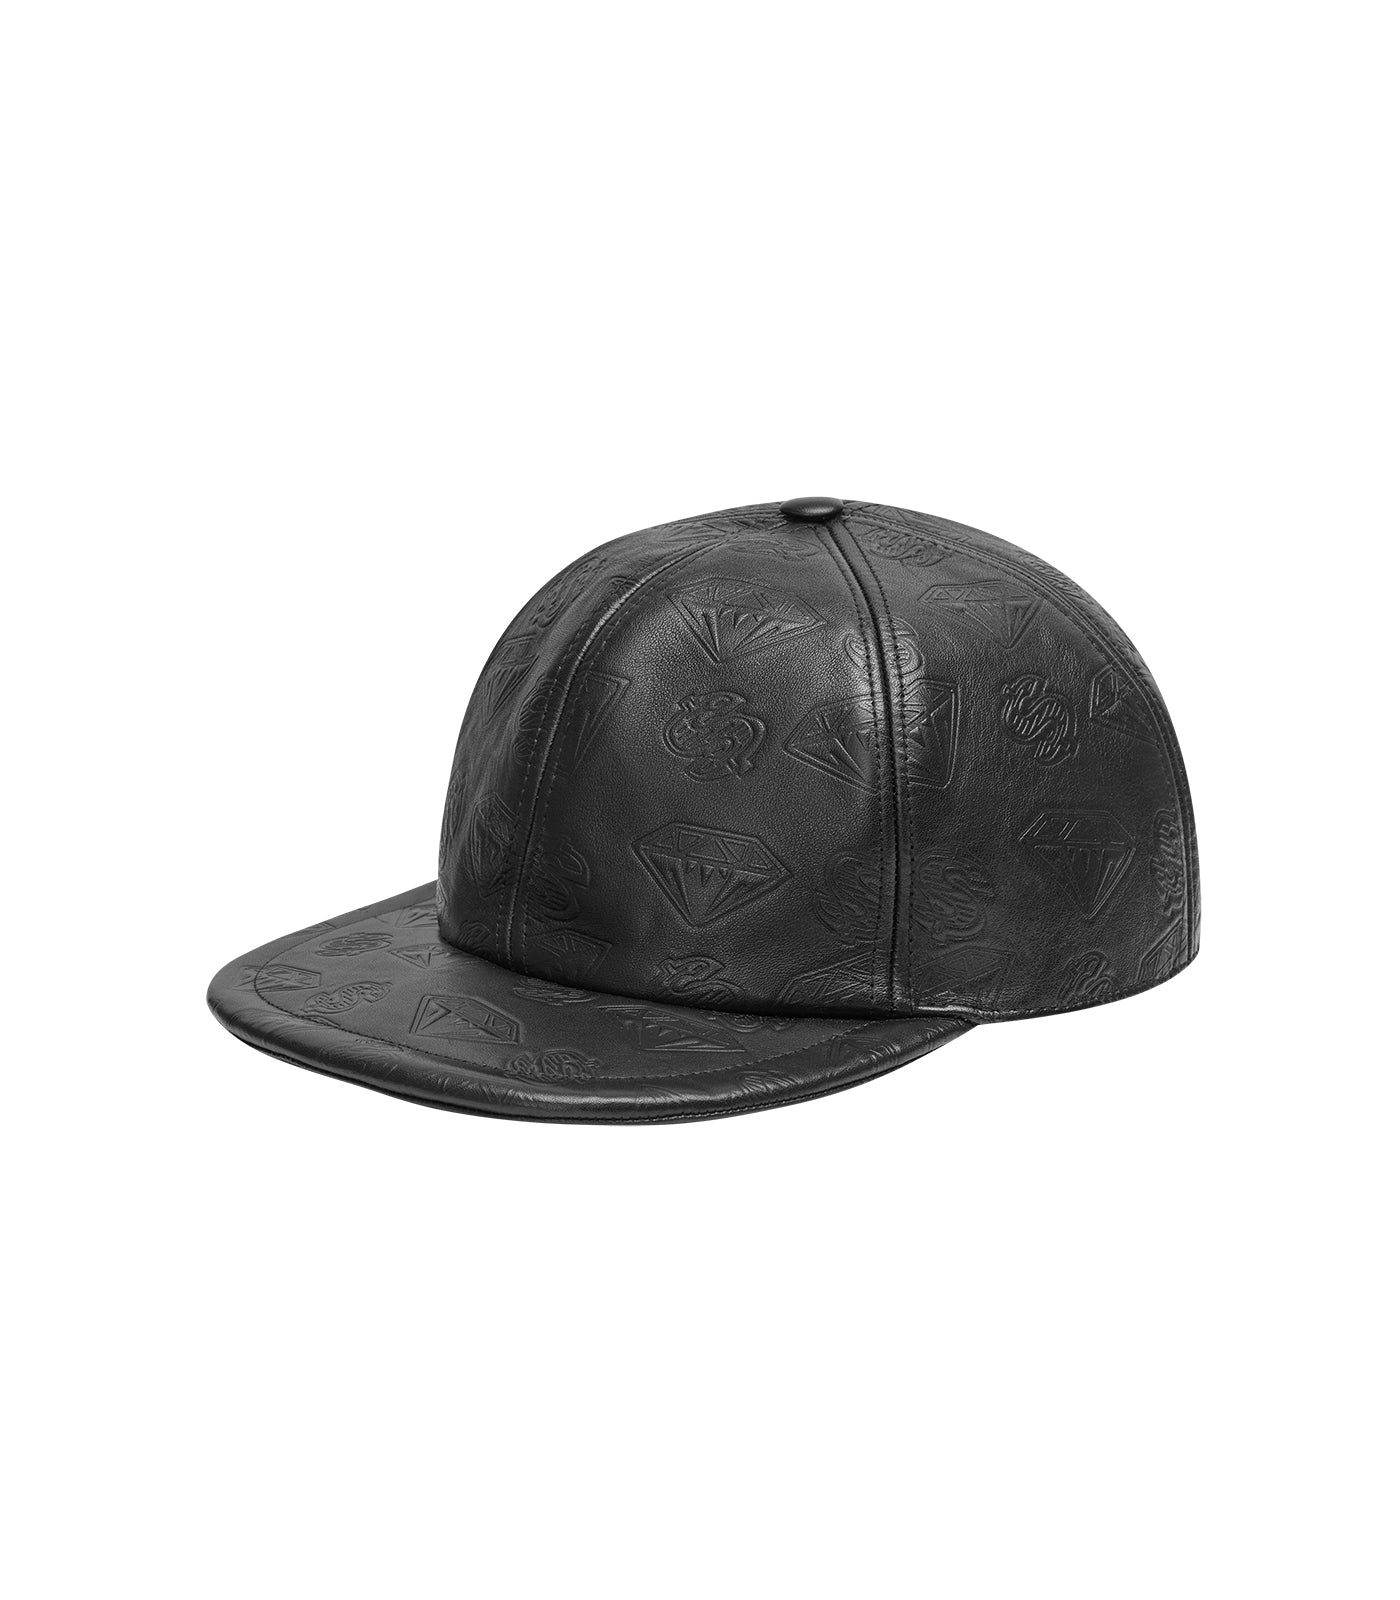 Load image into Gallery viewer, Leather Baseball Cap
